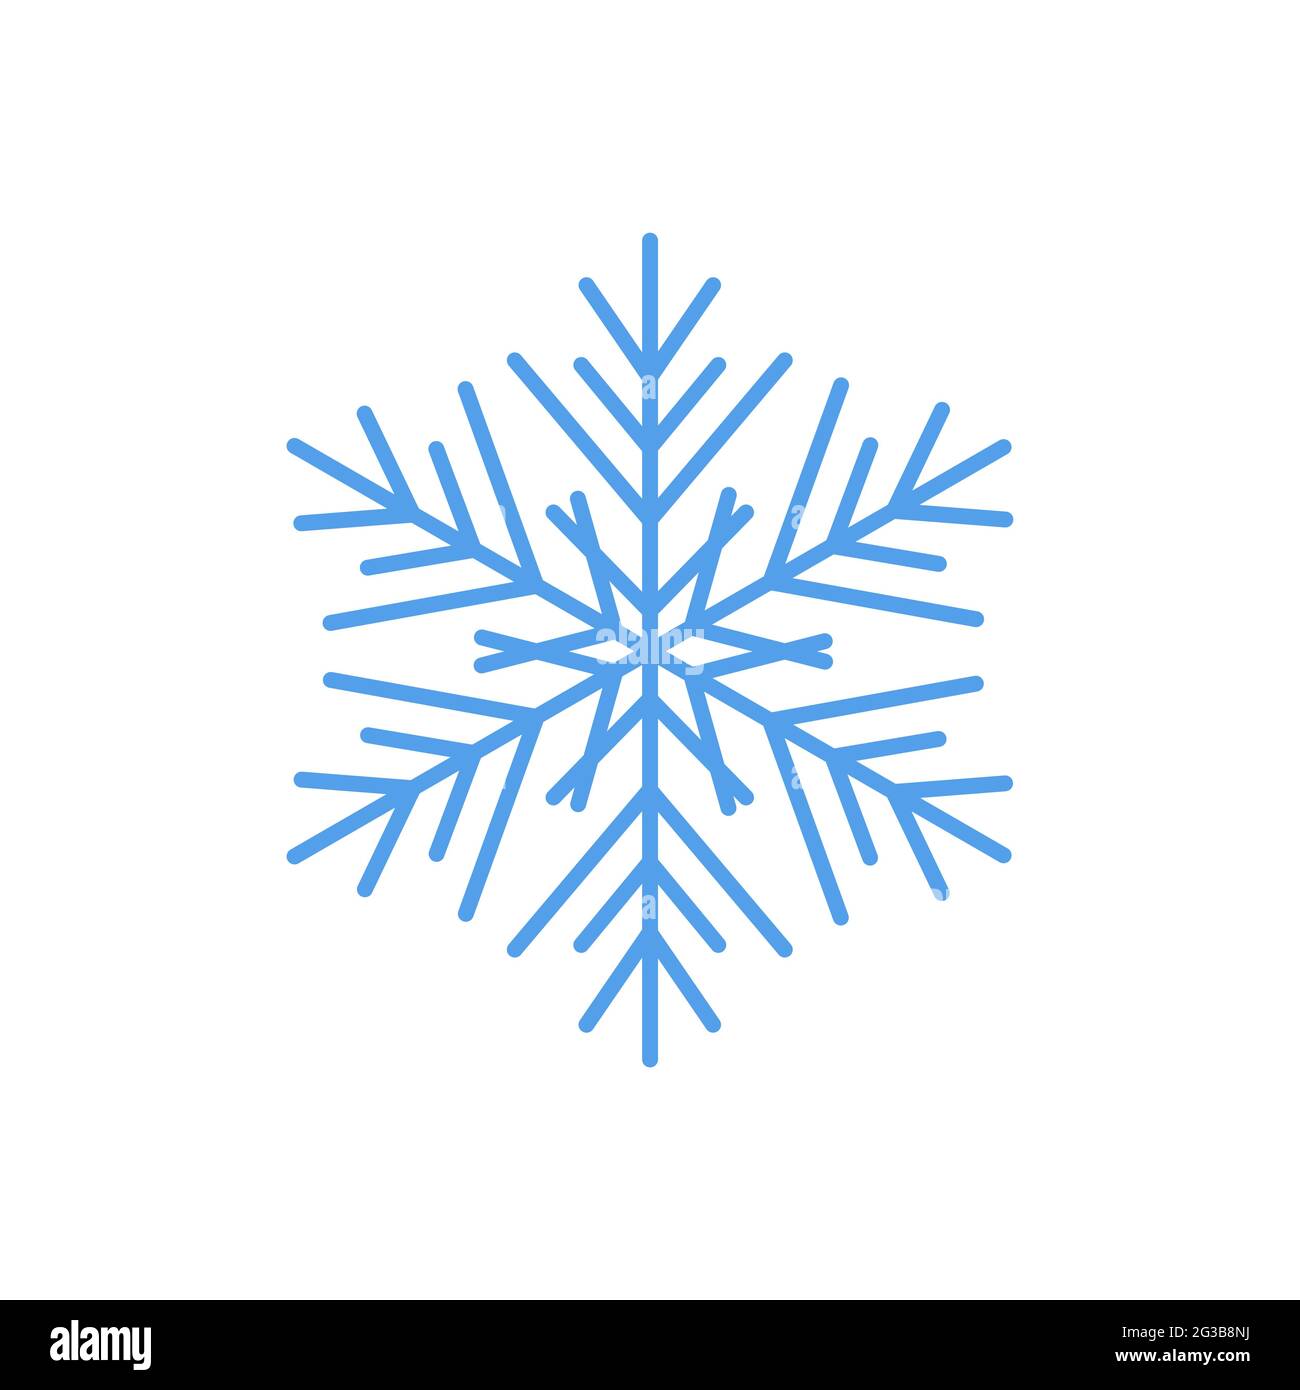 Snowflake icon. Christmas and winter theme. Simple flat blue illustration on white Stock Vector